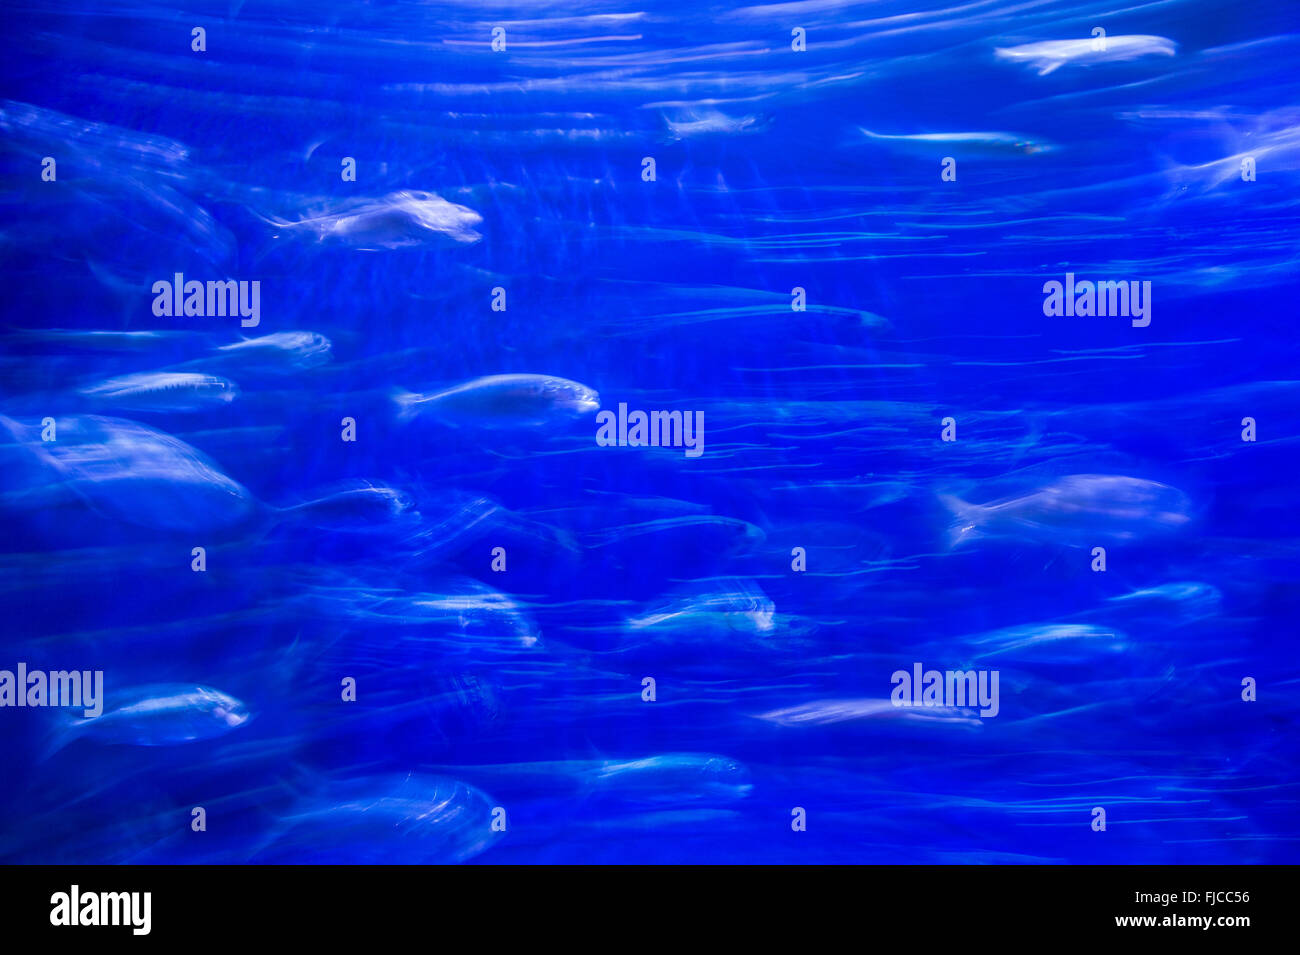 Fish Swimming In Abstract Artistic Blur Stock Photo